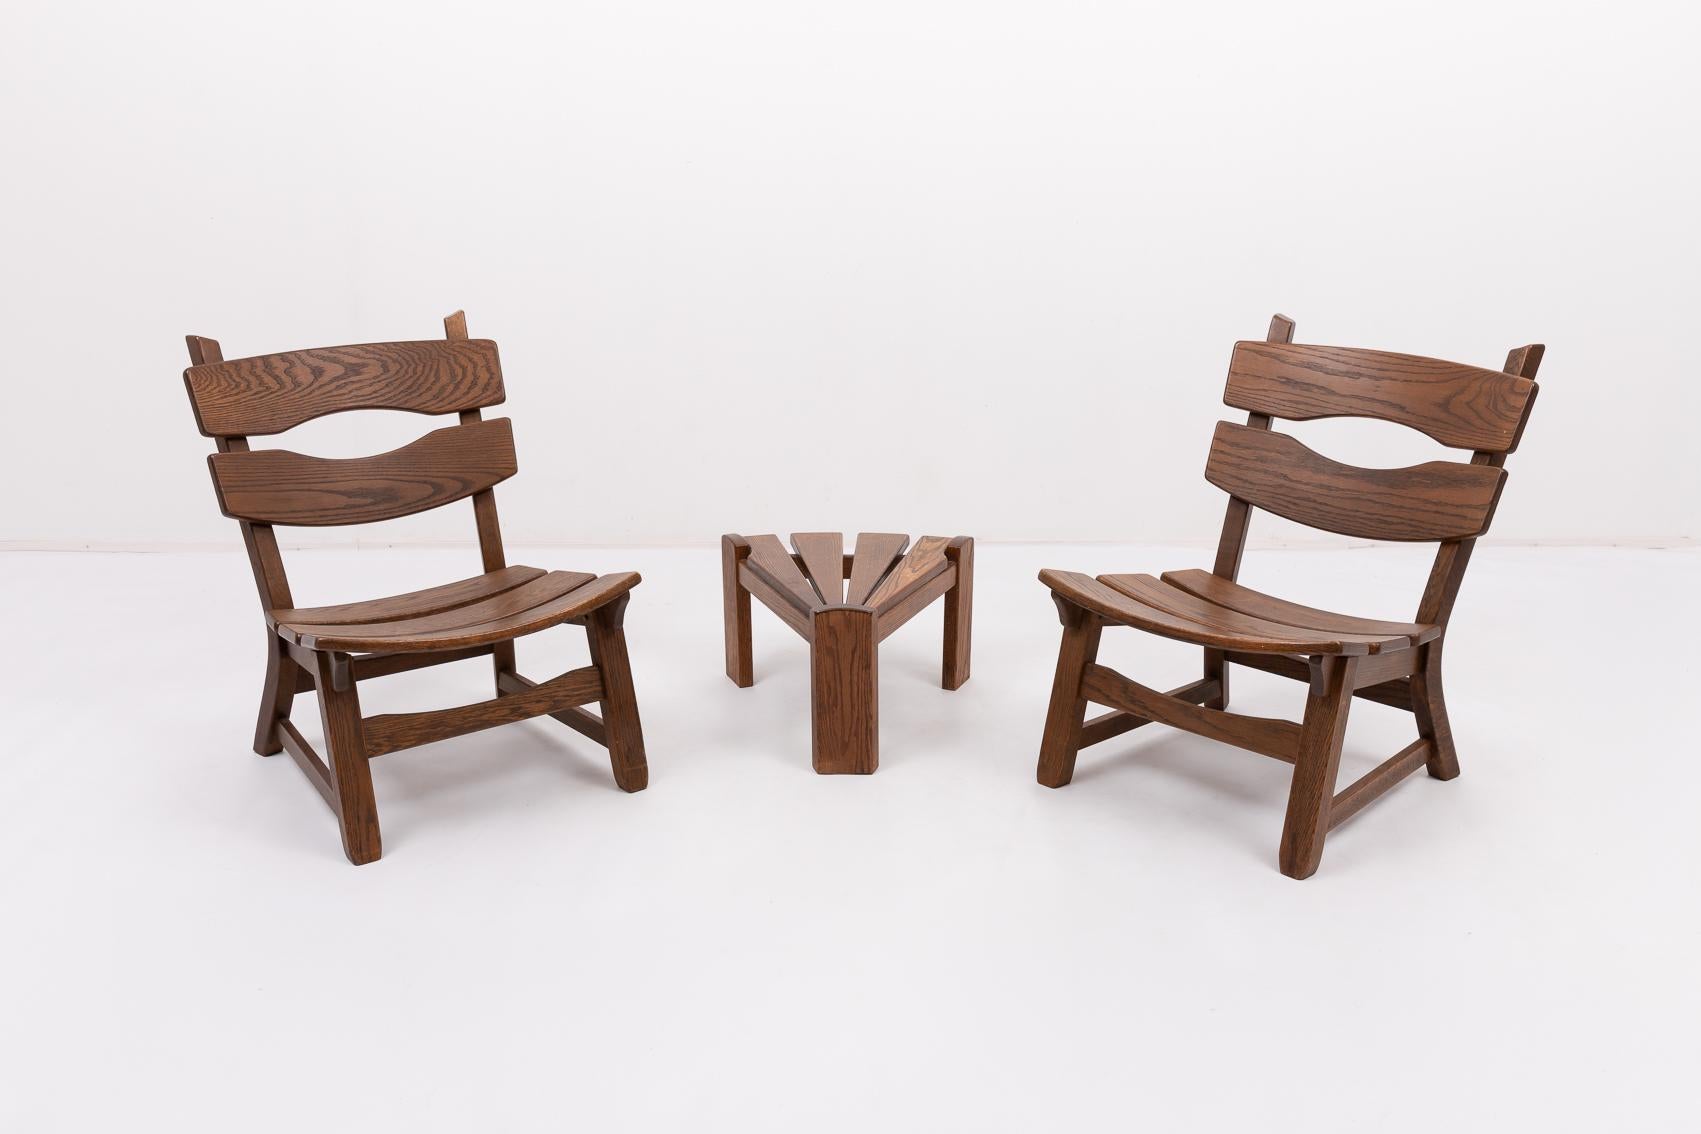 Set of 4 Brutalist chairs with side table in stained oak by Dittmann & Co for AWA. It features curved back and rounded seat. Reminiscent to Pierre Chapo and Charlotte Perriand designs.

Condition
Good, usage marks and age related wear.

Dimensions